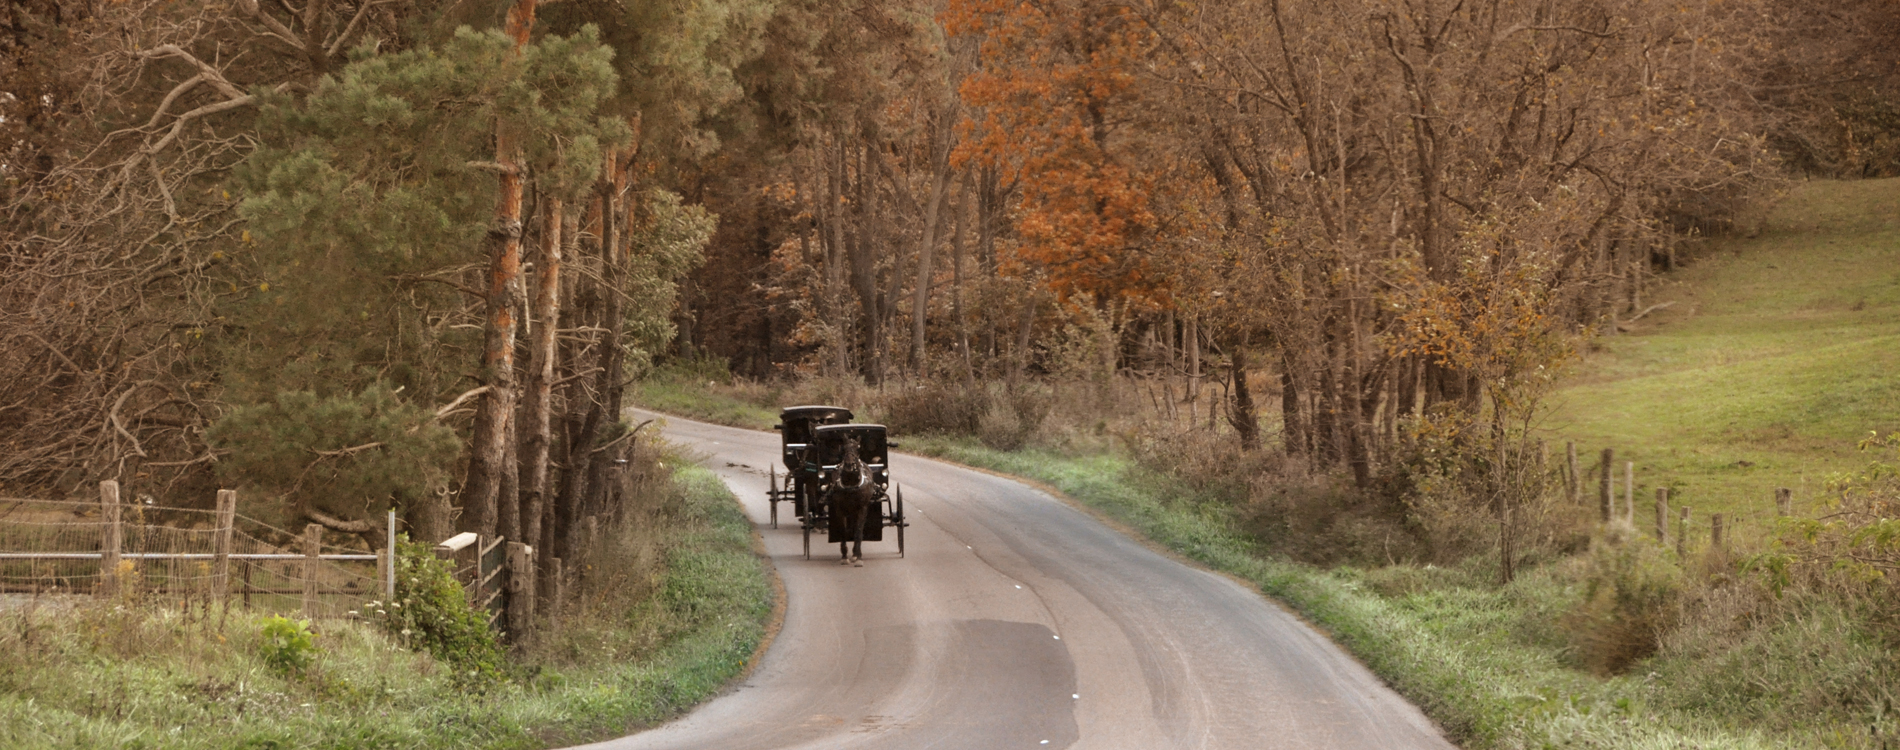 Amish Country, OH - Amish Buggy